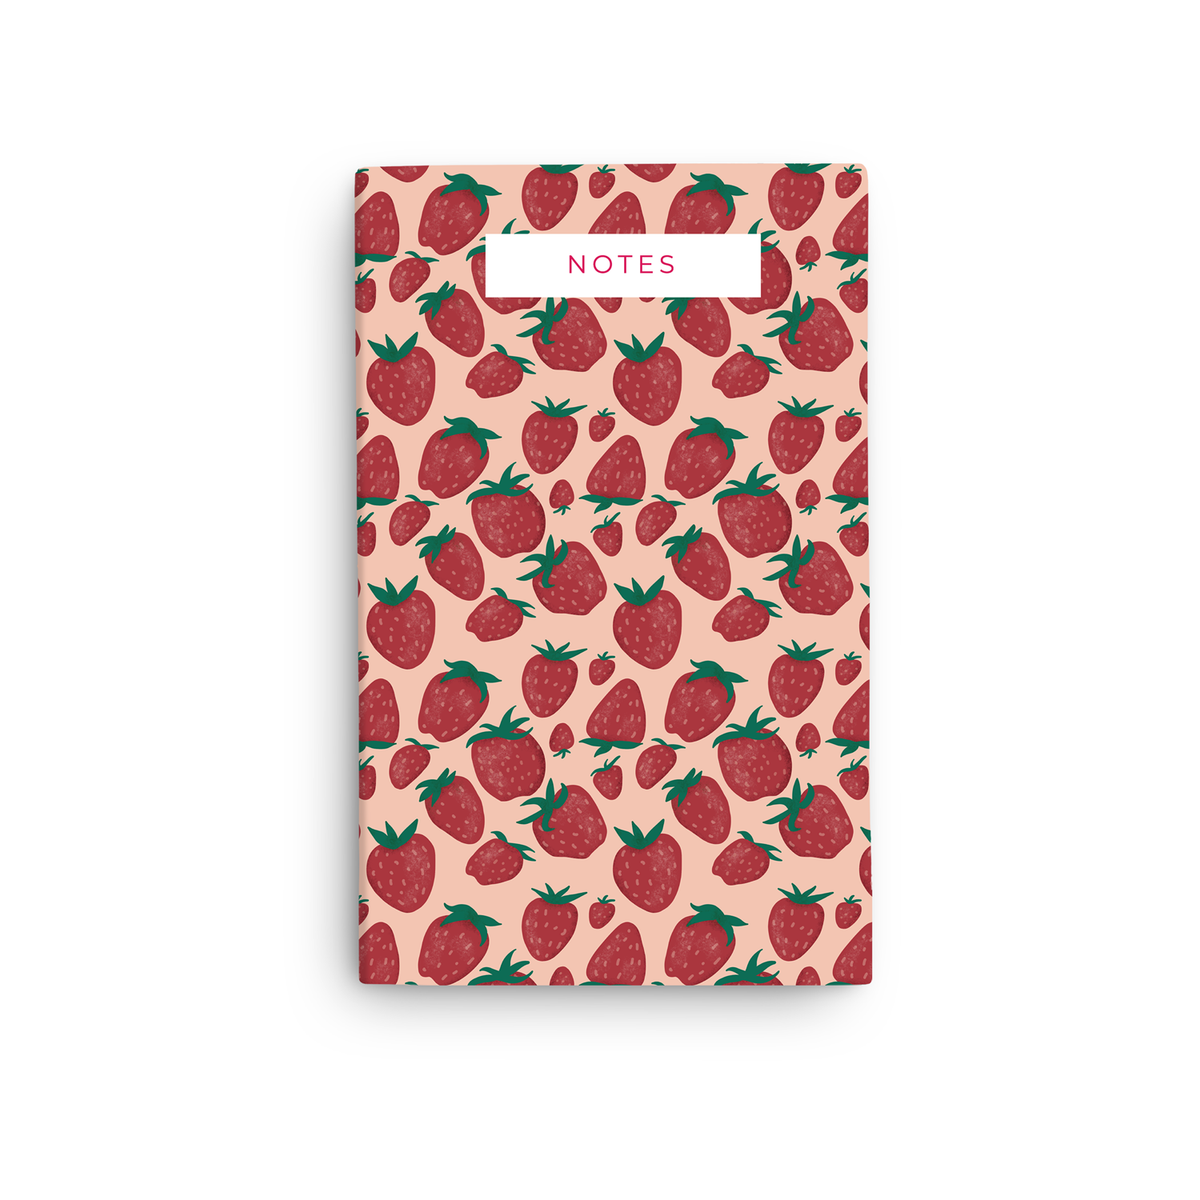 Strawberry Fields Soft Cover Notebook